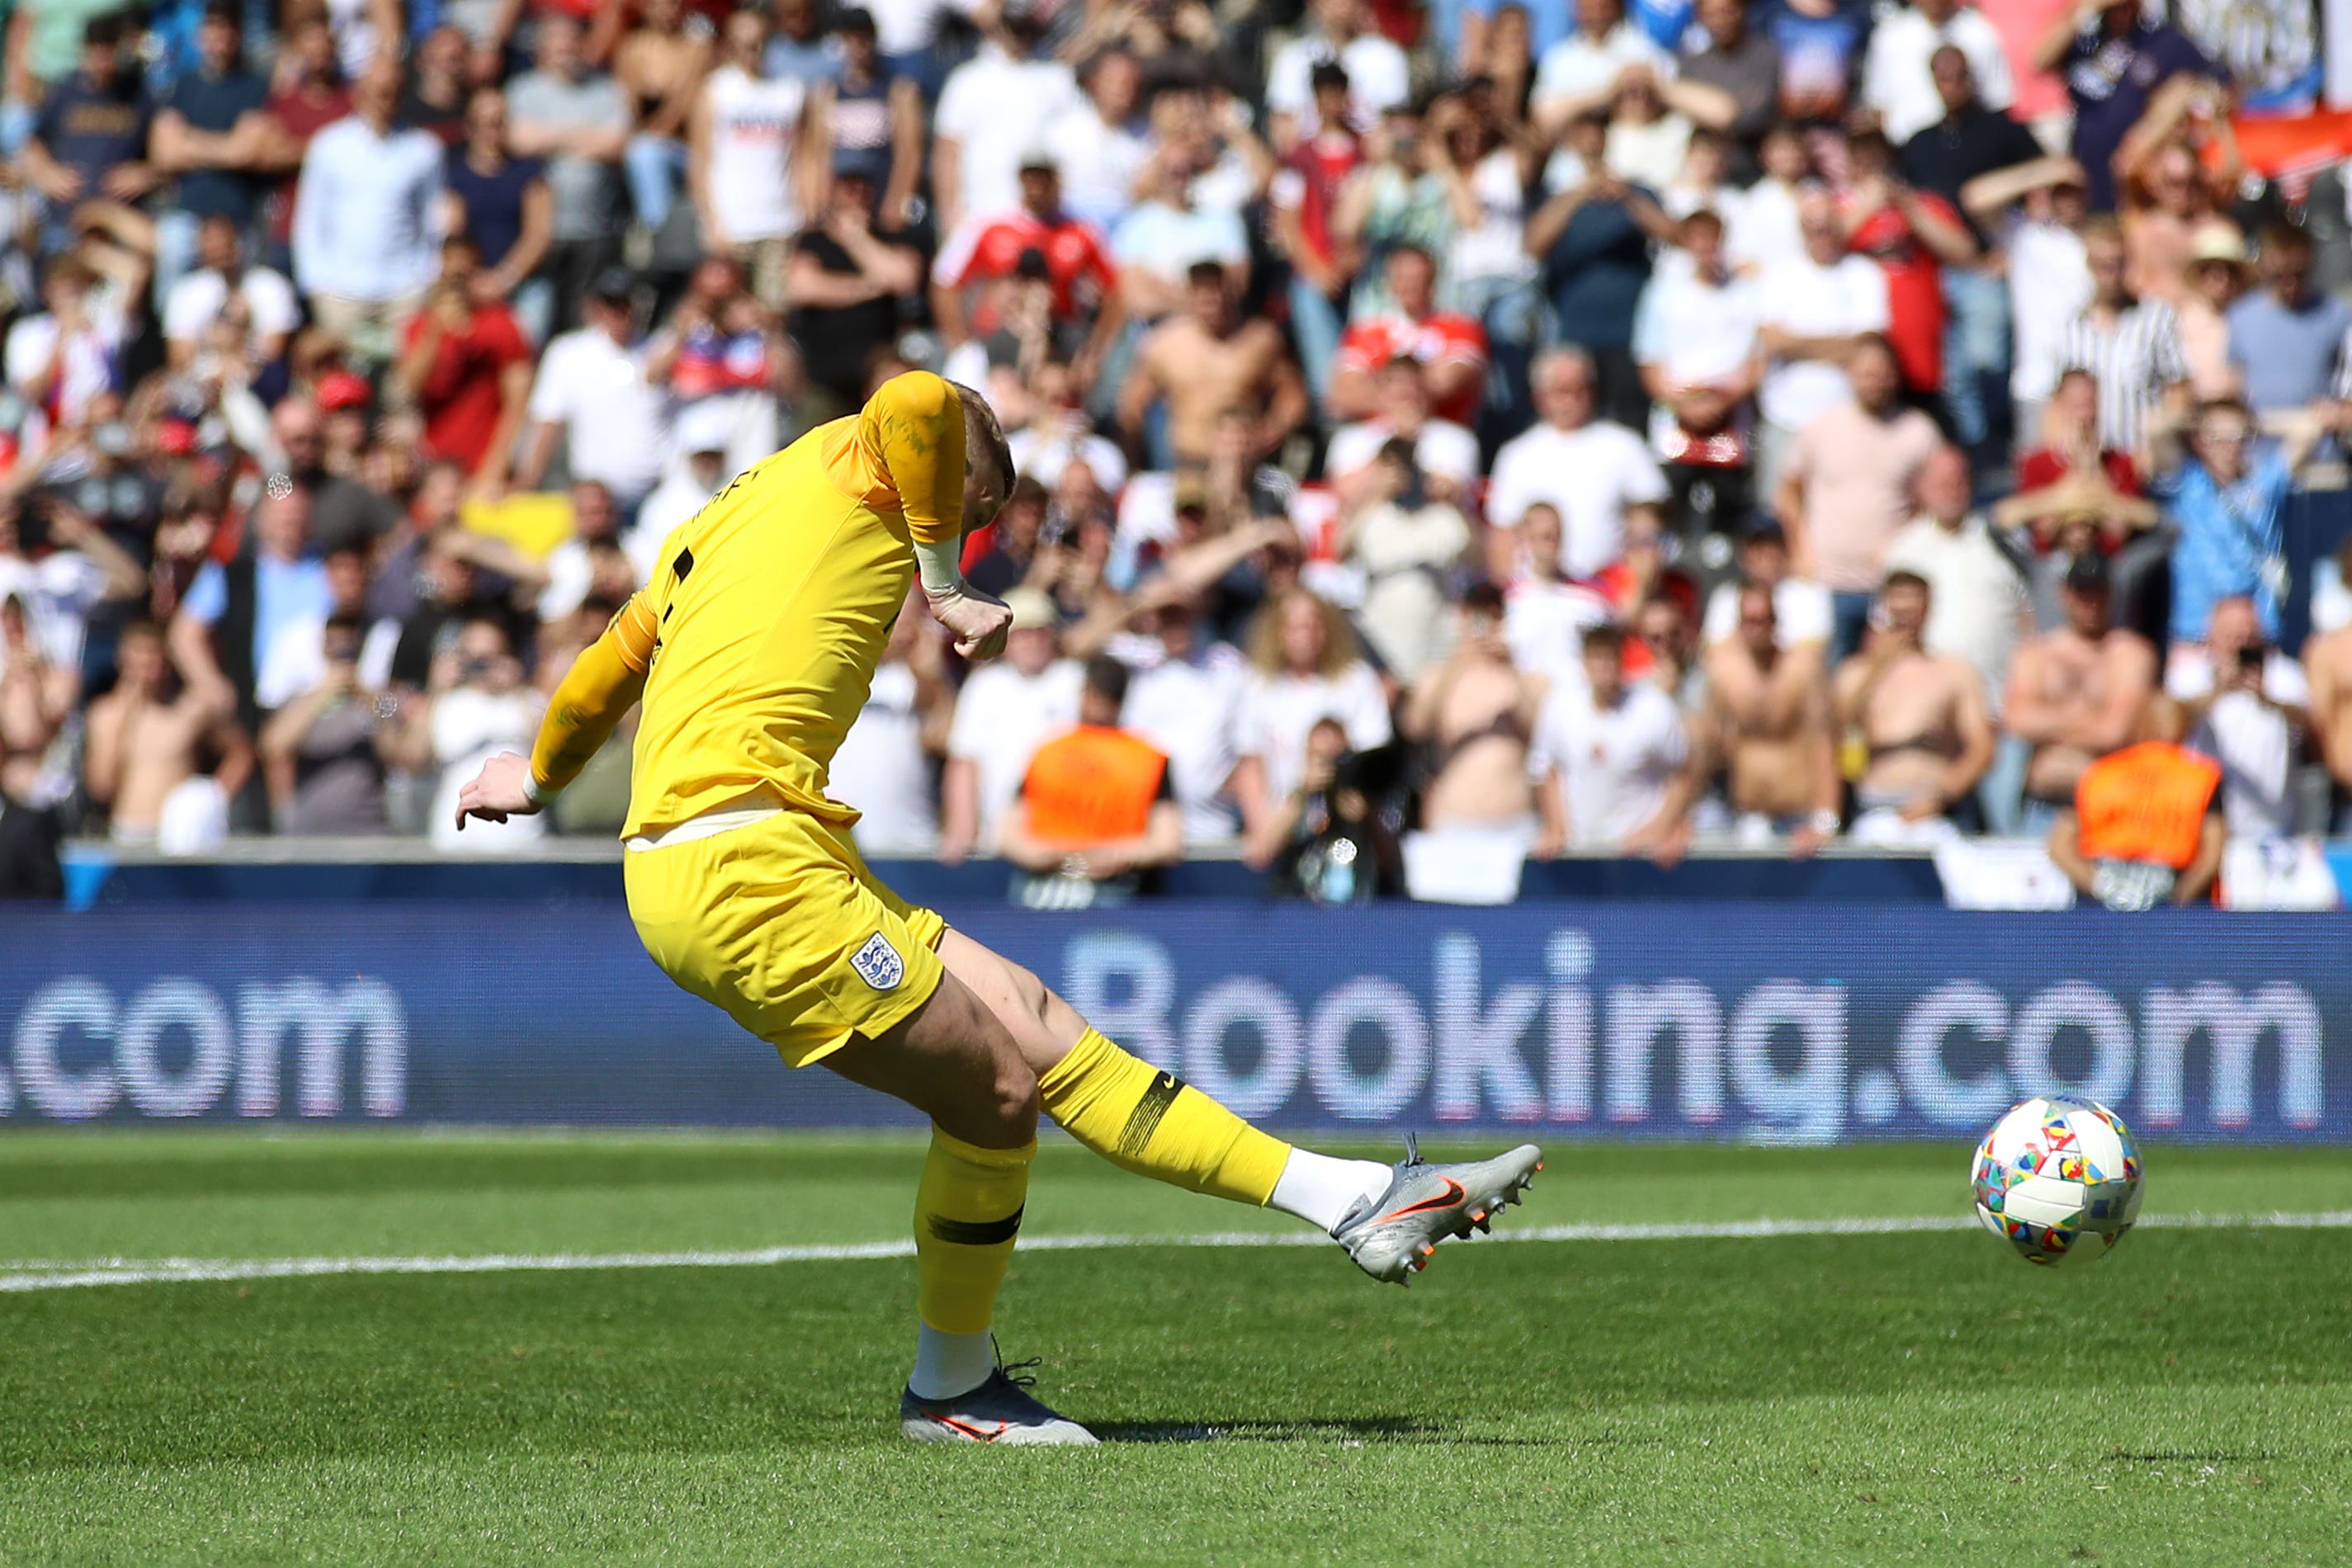 England goalkeeper Jordan Pickford scored a penalty during the shoot-out in the Nations League third place play-off (Tim Goode/PA)